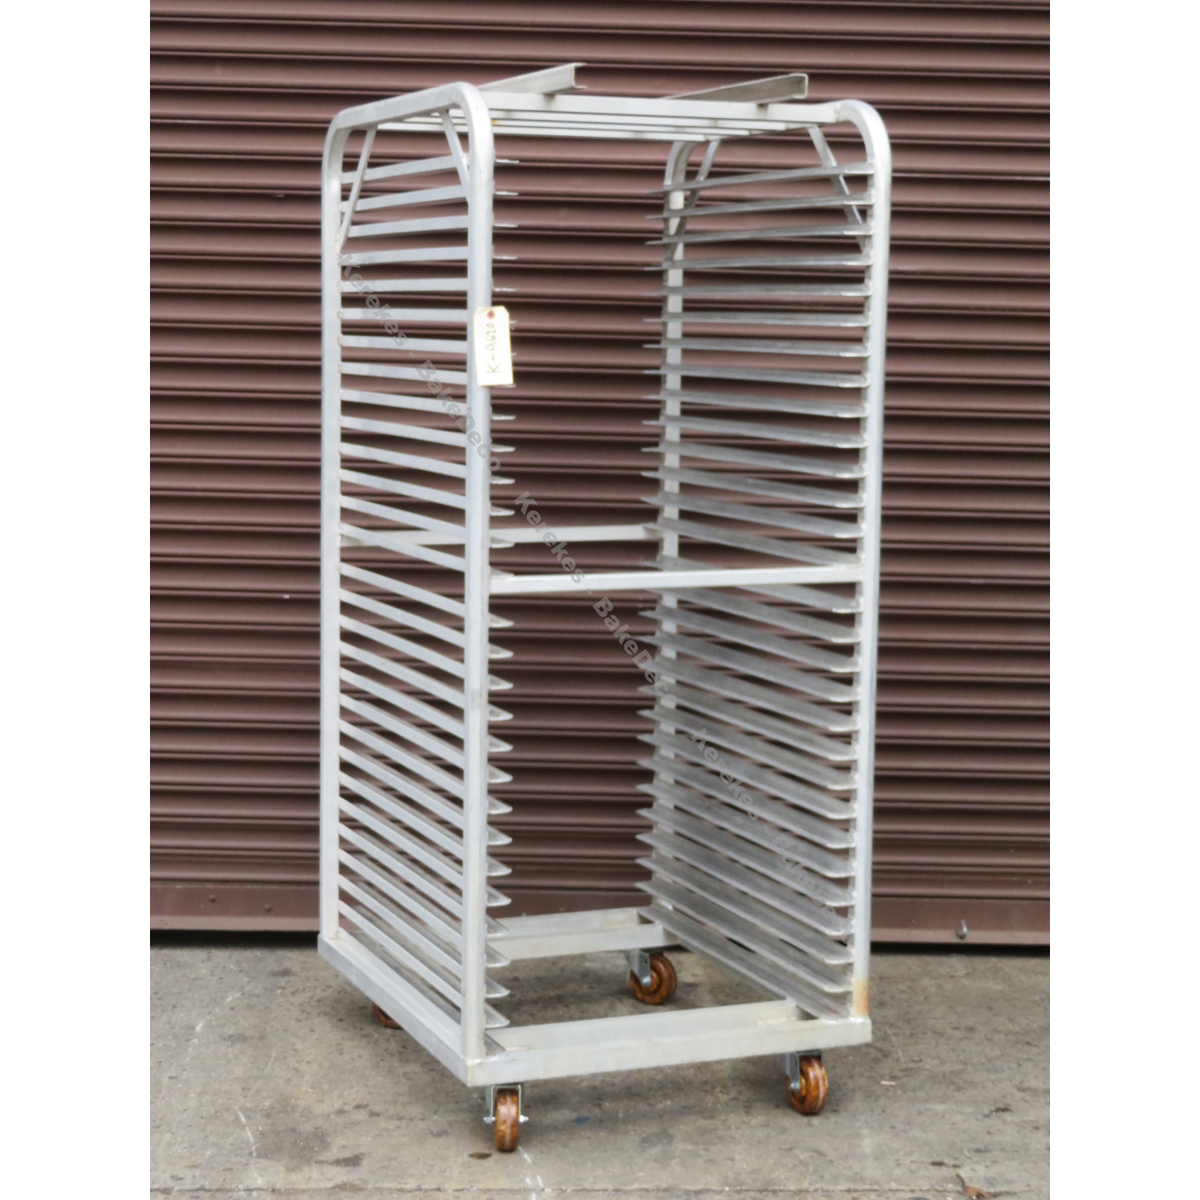 Double Oven Rack For Baxter Double Rack Oven, Used Excellent Condition